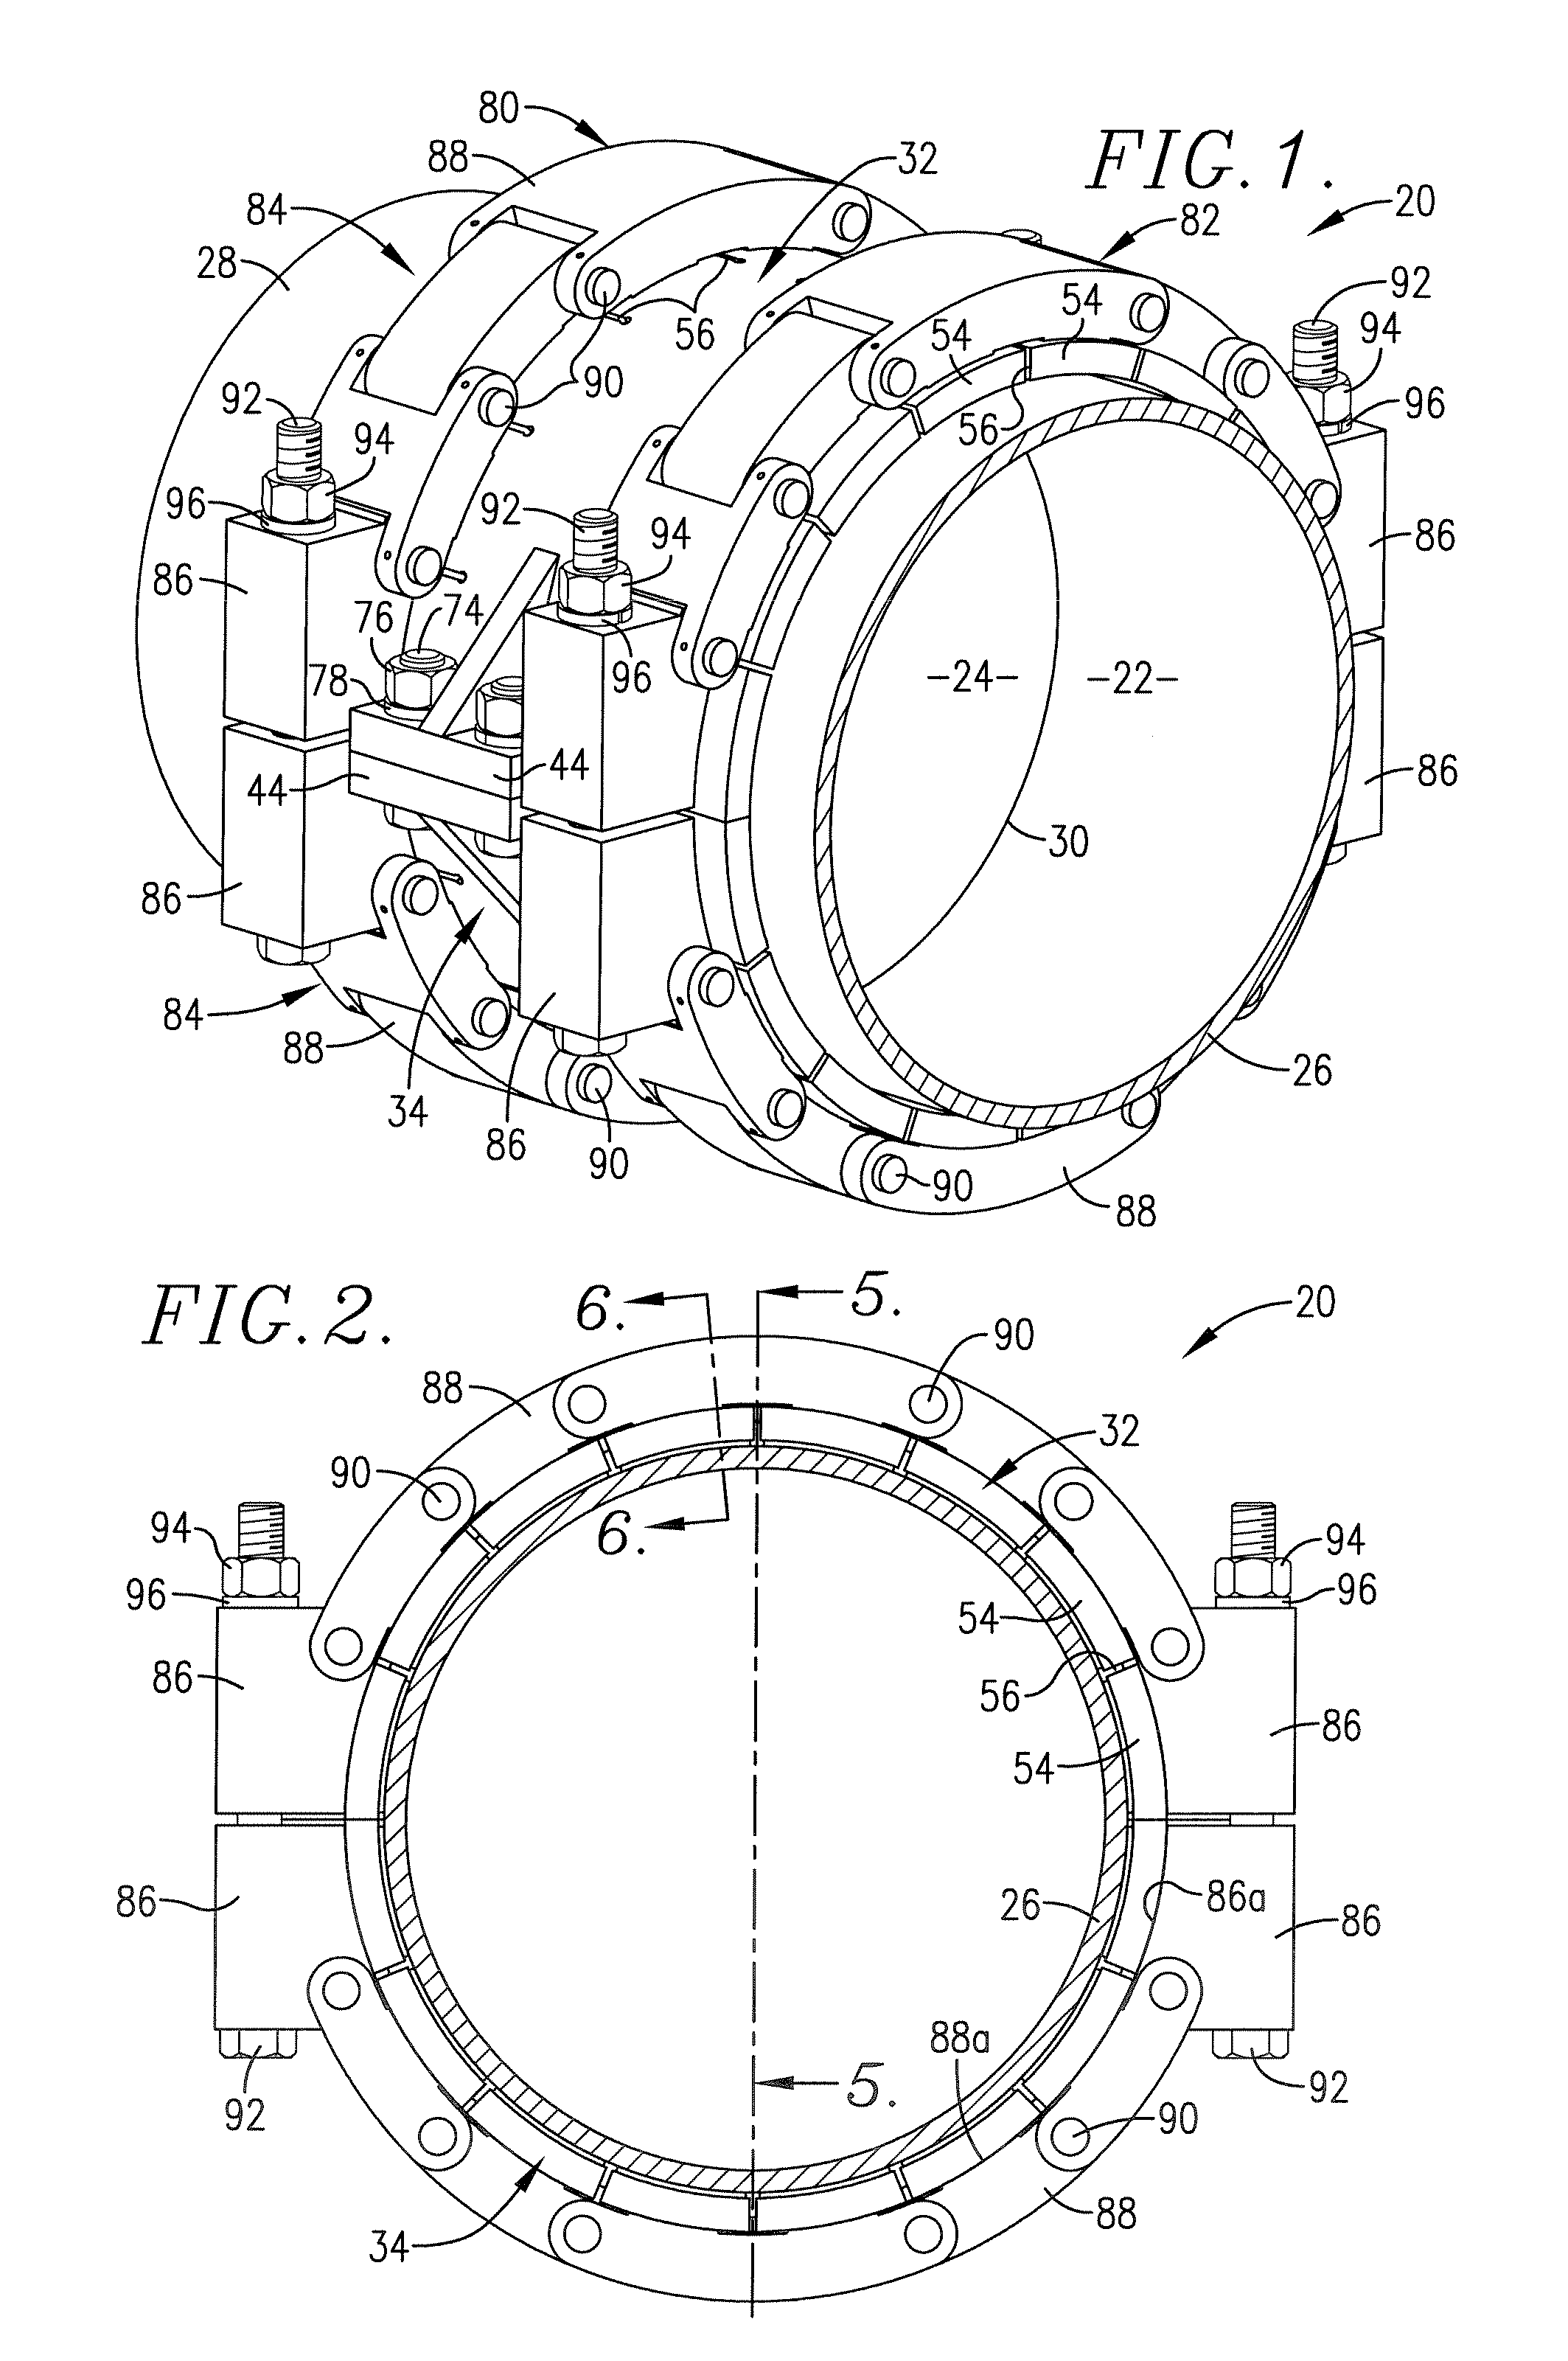 Self-tightening clamp assemblies for protection against full pipe separation